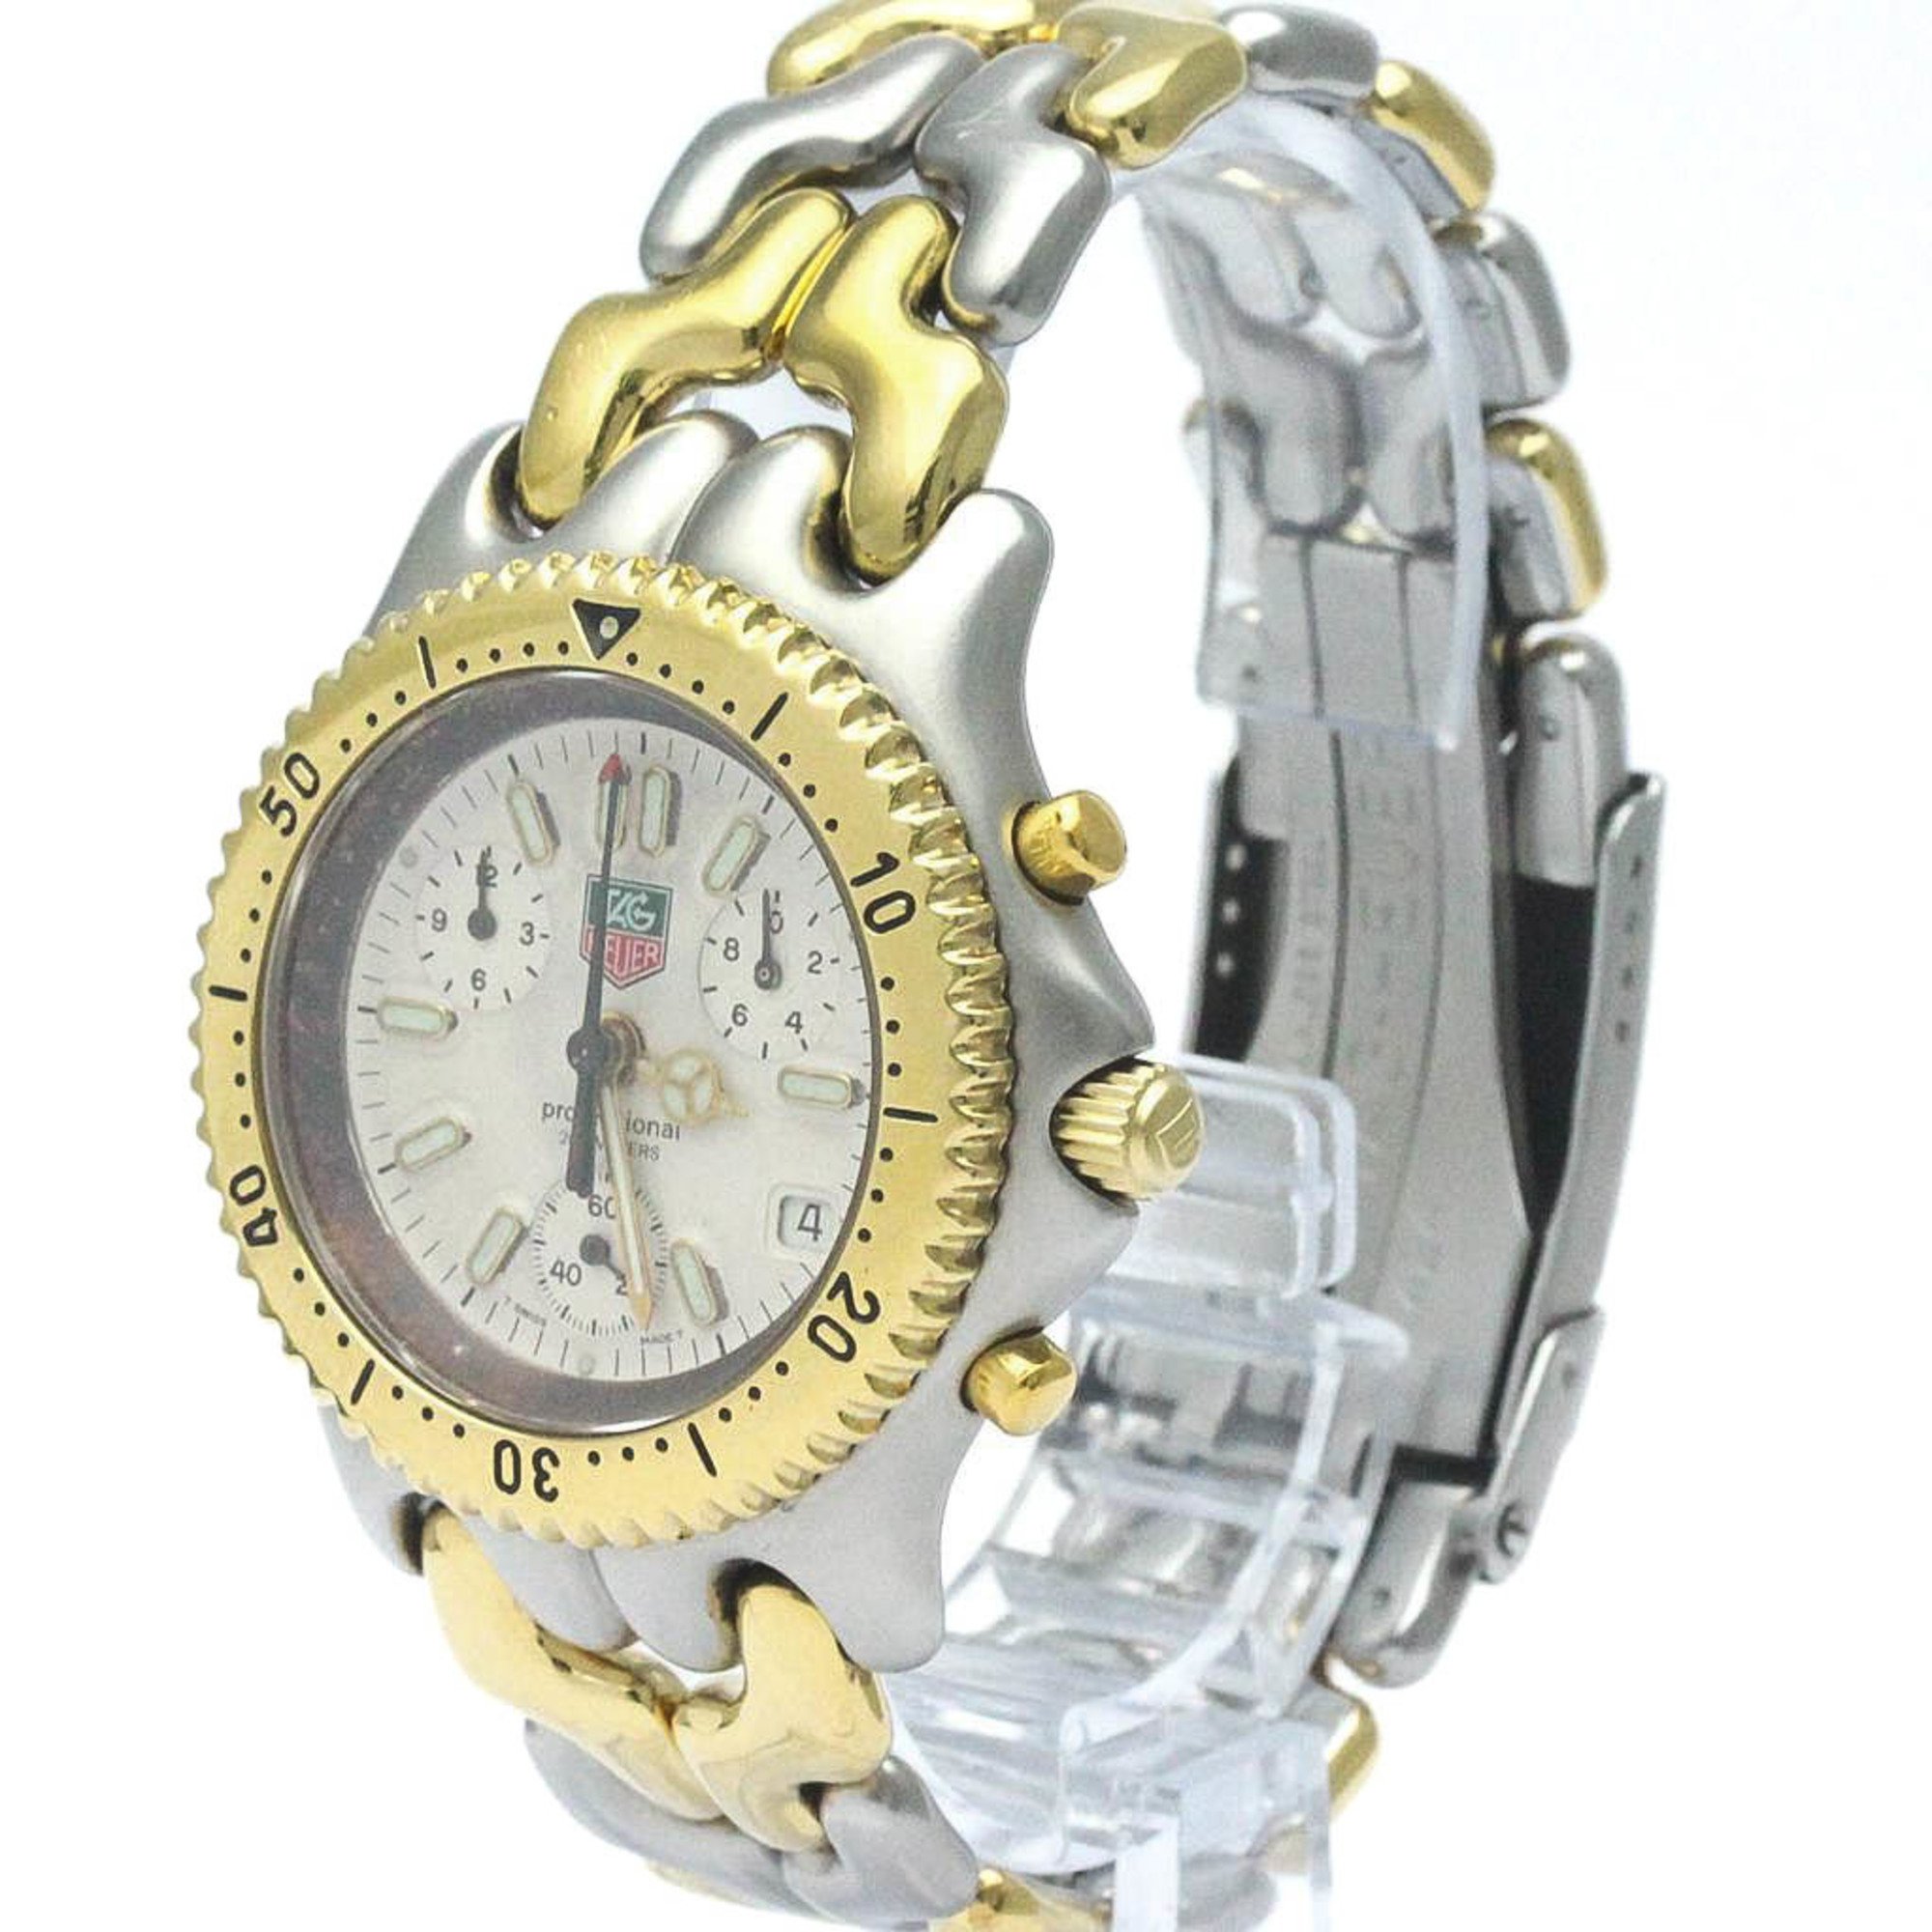 Polished TAG HEUER Sel Chronograph Gold Plated Steel Mens Watch S35.006